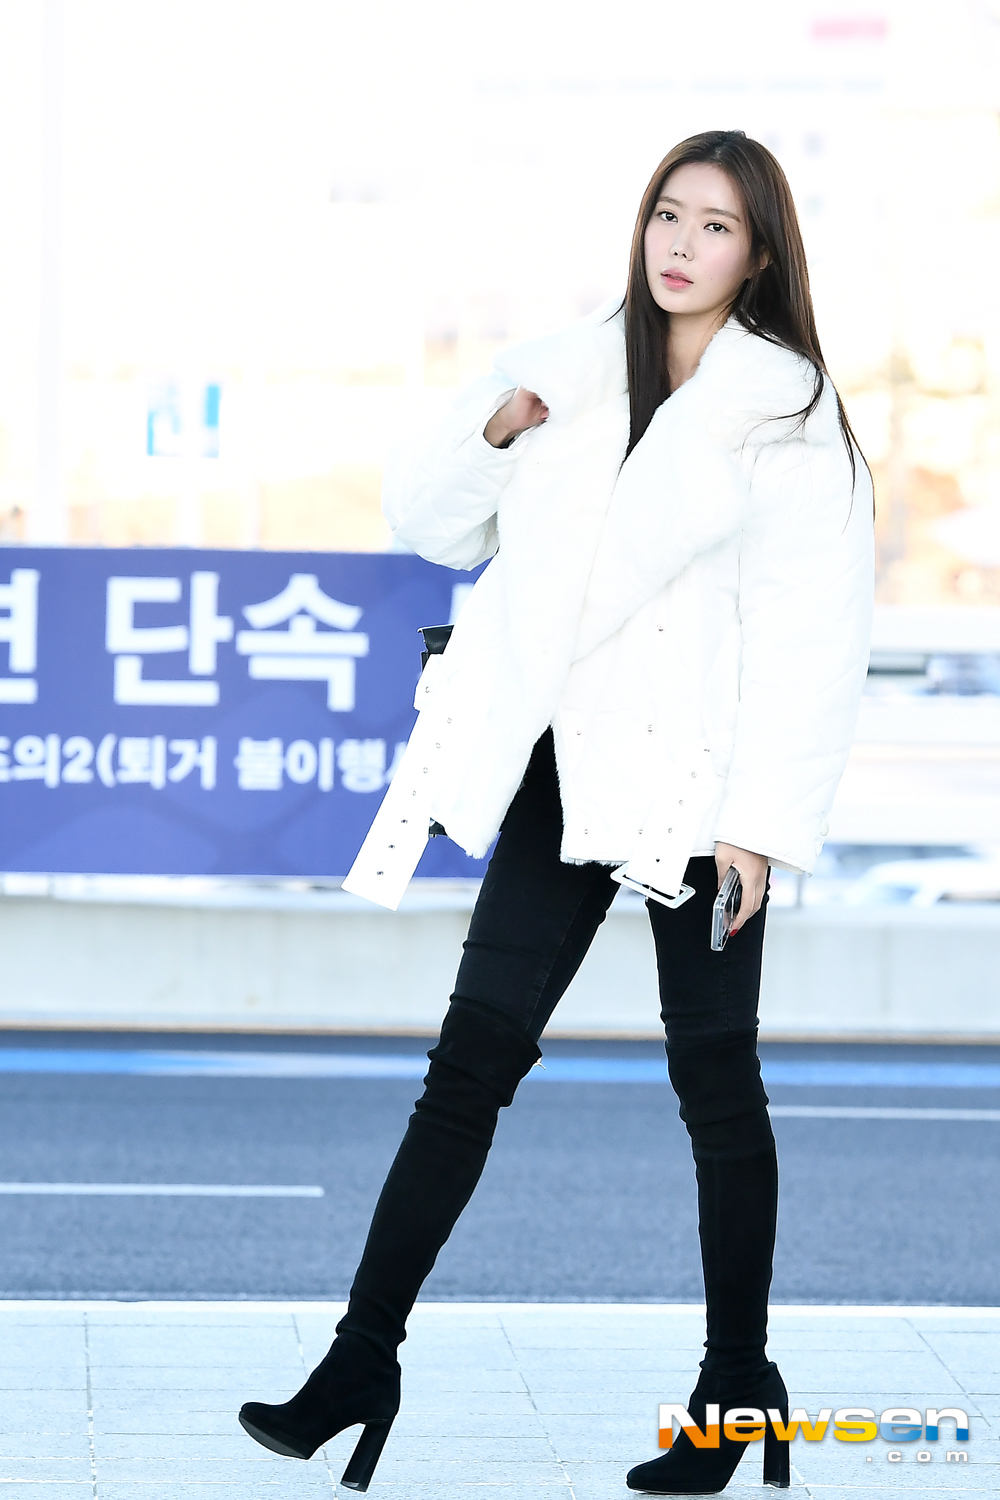 Actor Im Soo-hyang left for Shanghai, China on a schedule overseas through Incheon International Airport in Unseo-dong, Jung-gu, Incheon on the morning of January 9th.Actor Im Soo-hyang is leaving for Shanghai, China, showing off his airport fashion.exponential earthquake